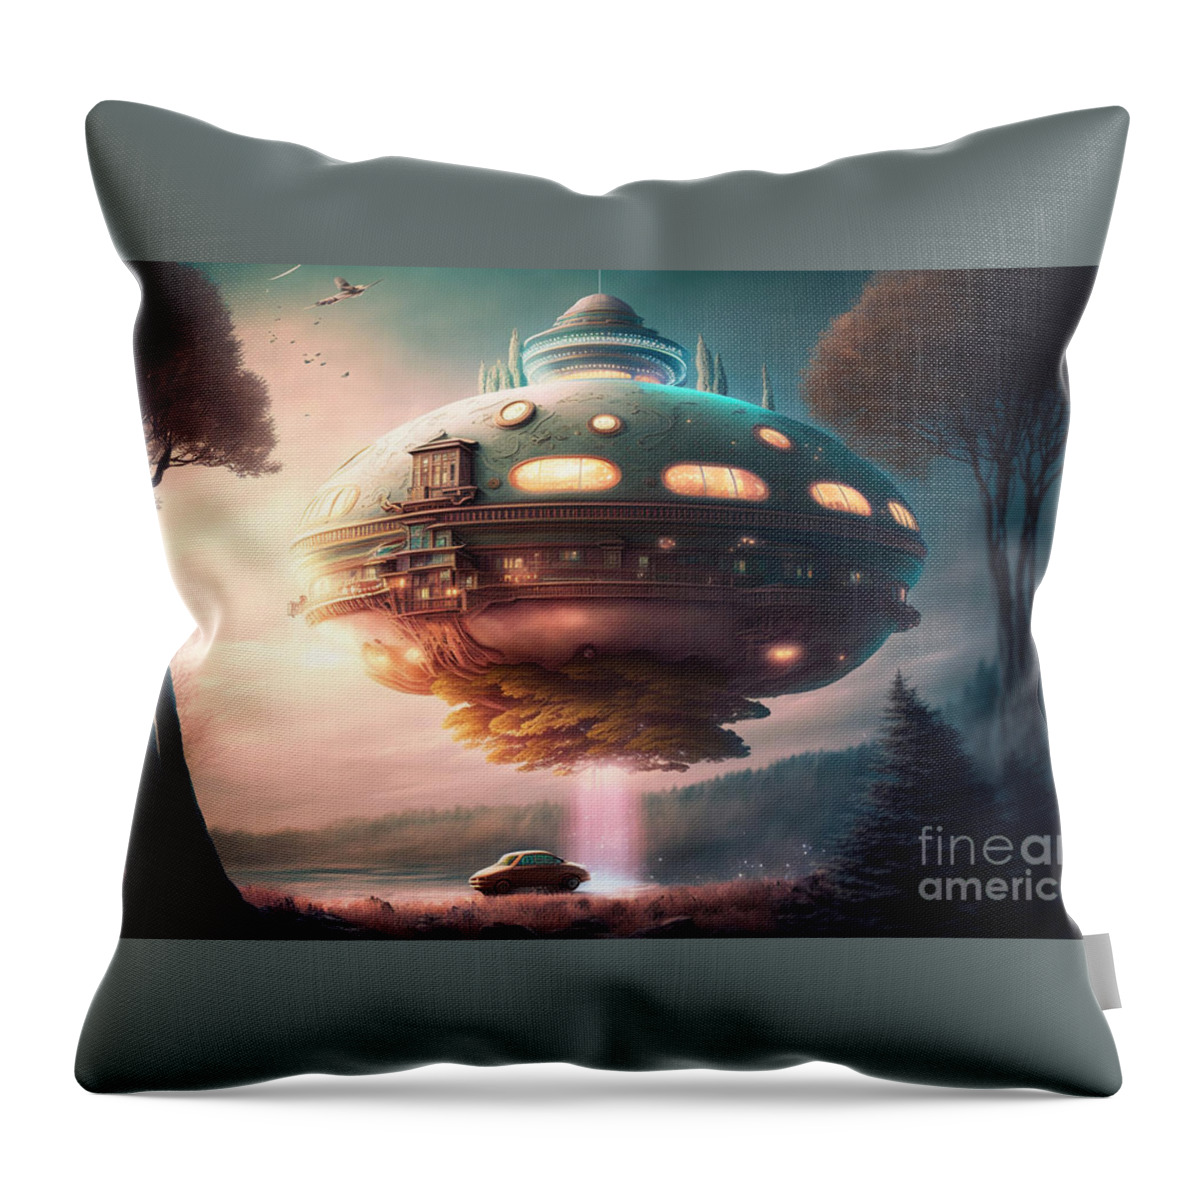 Hovering Ufo Throw Pillow featuring the mixed media Hovering UFO XII by Jay Schankman